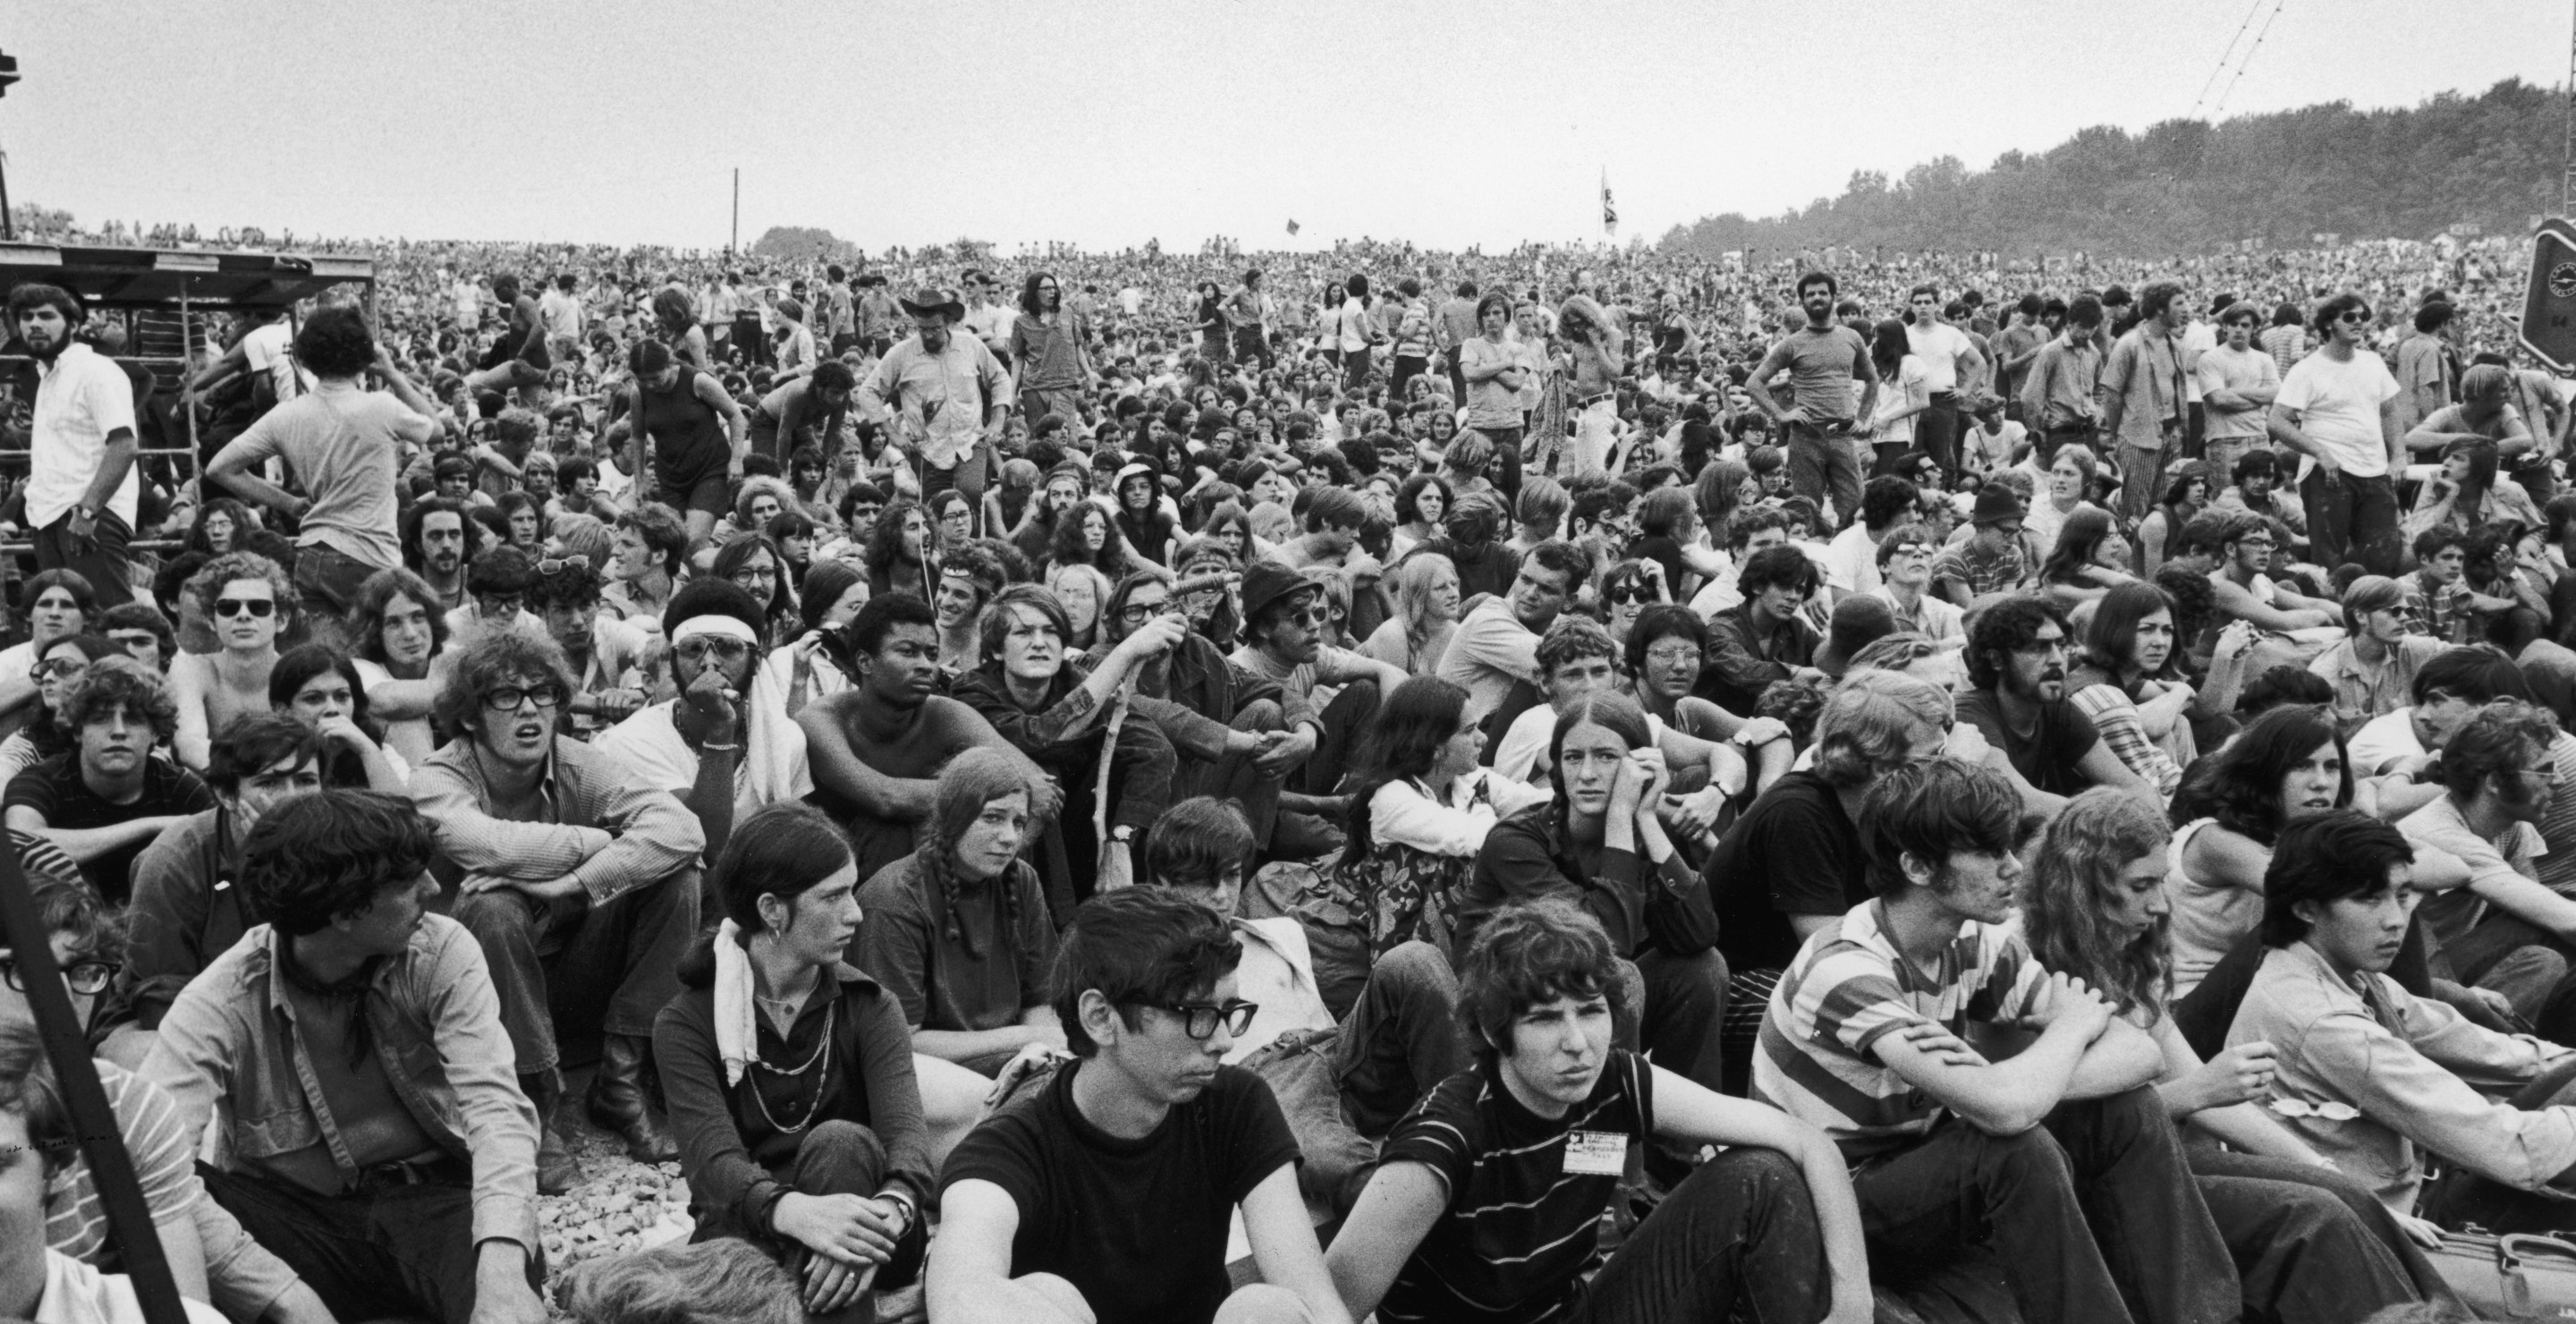 Two Women Return To Woodstock 55 Years Later To Relive Iconic Festival